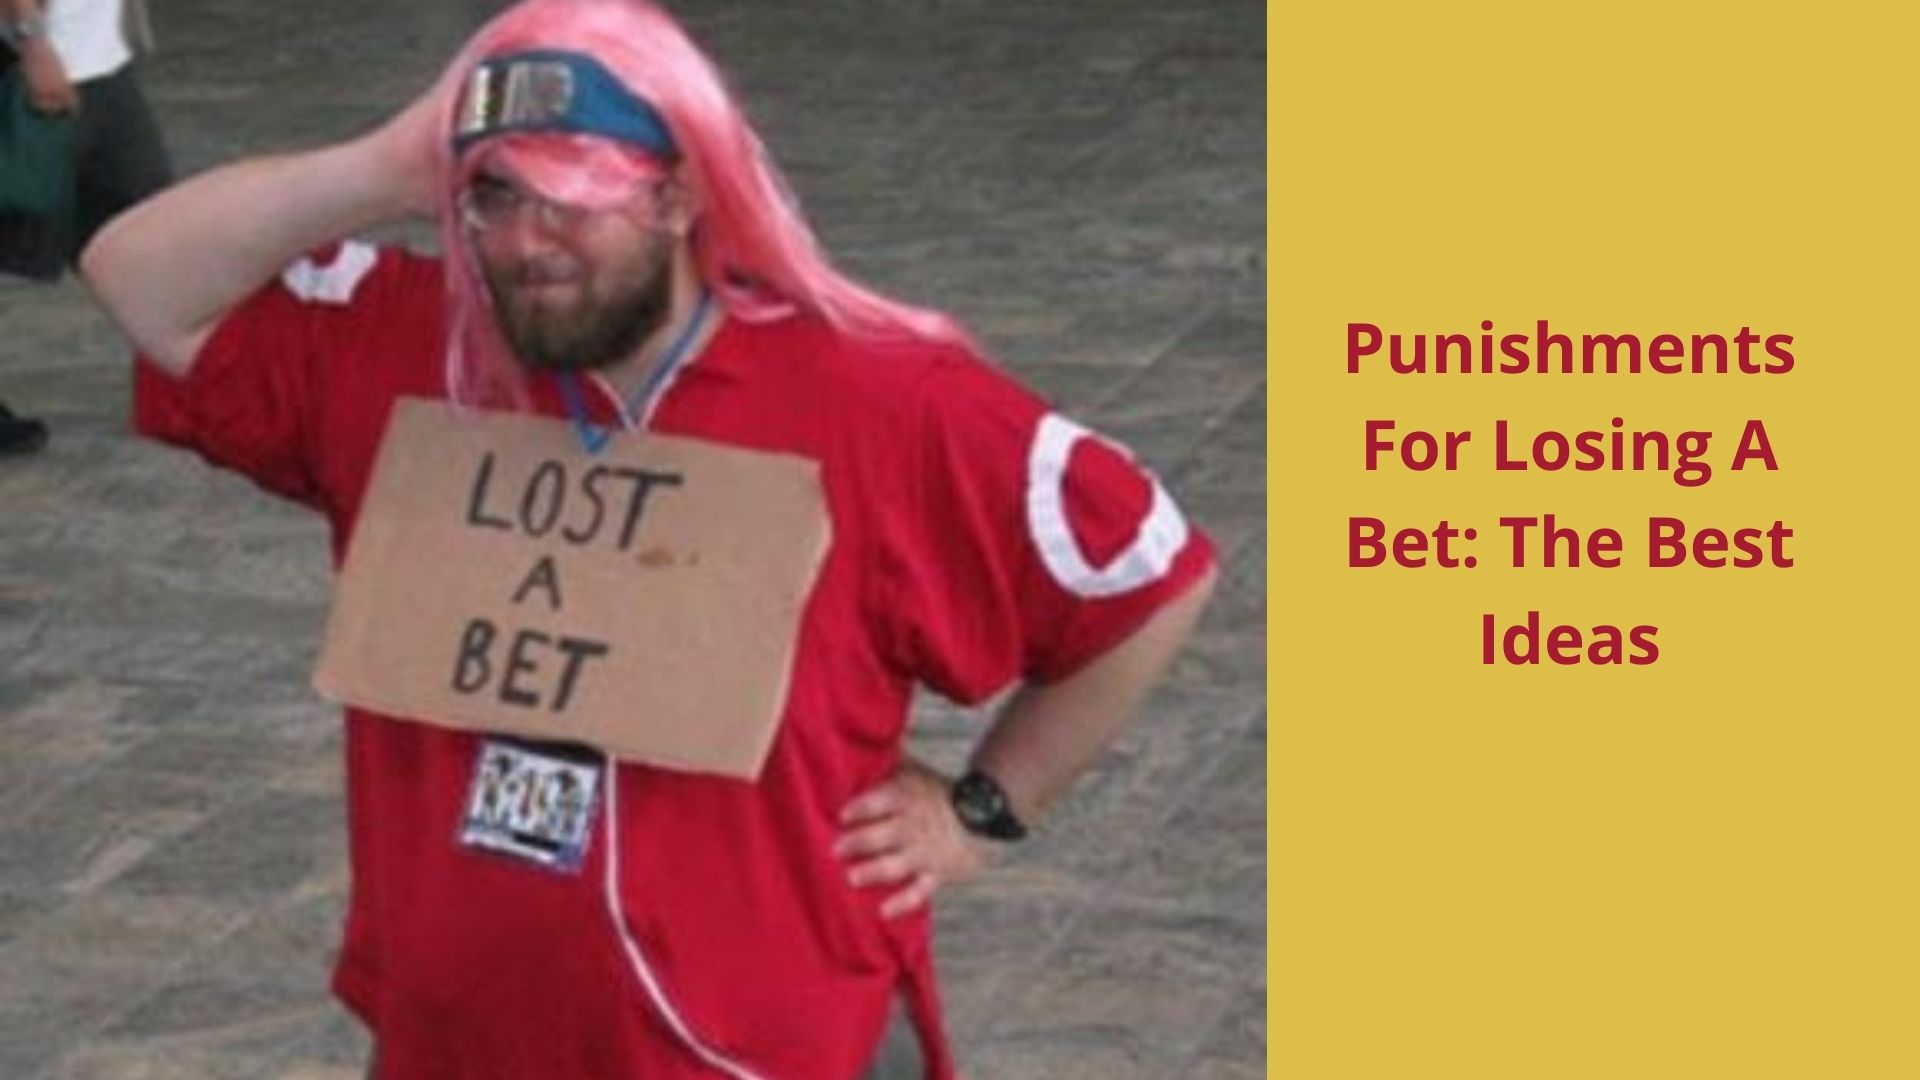 Punishments For Losing A Bet